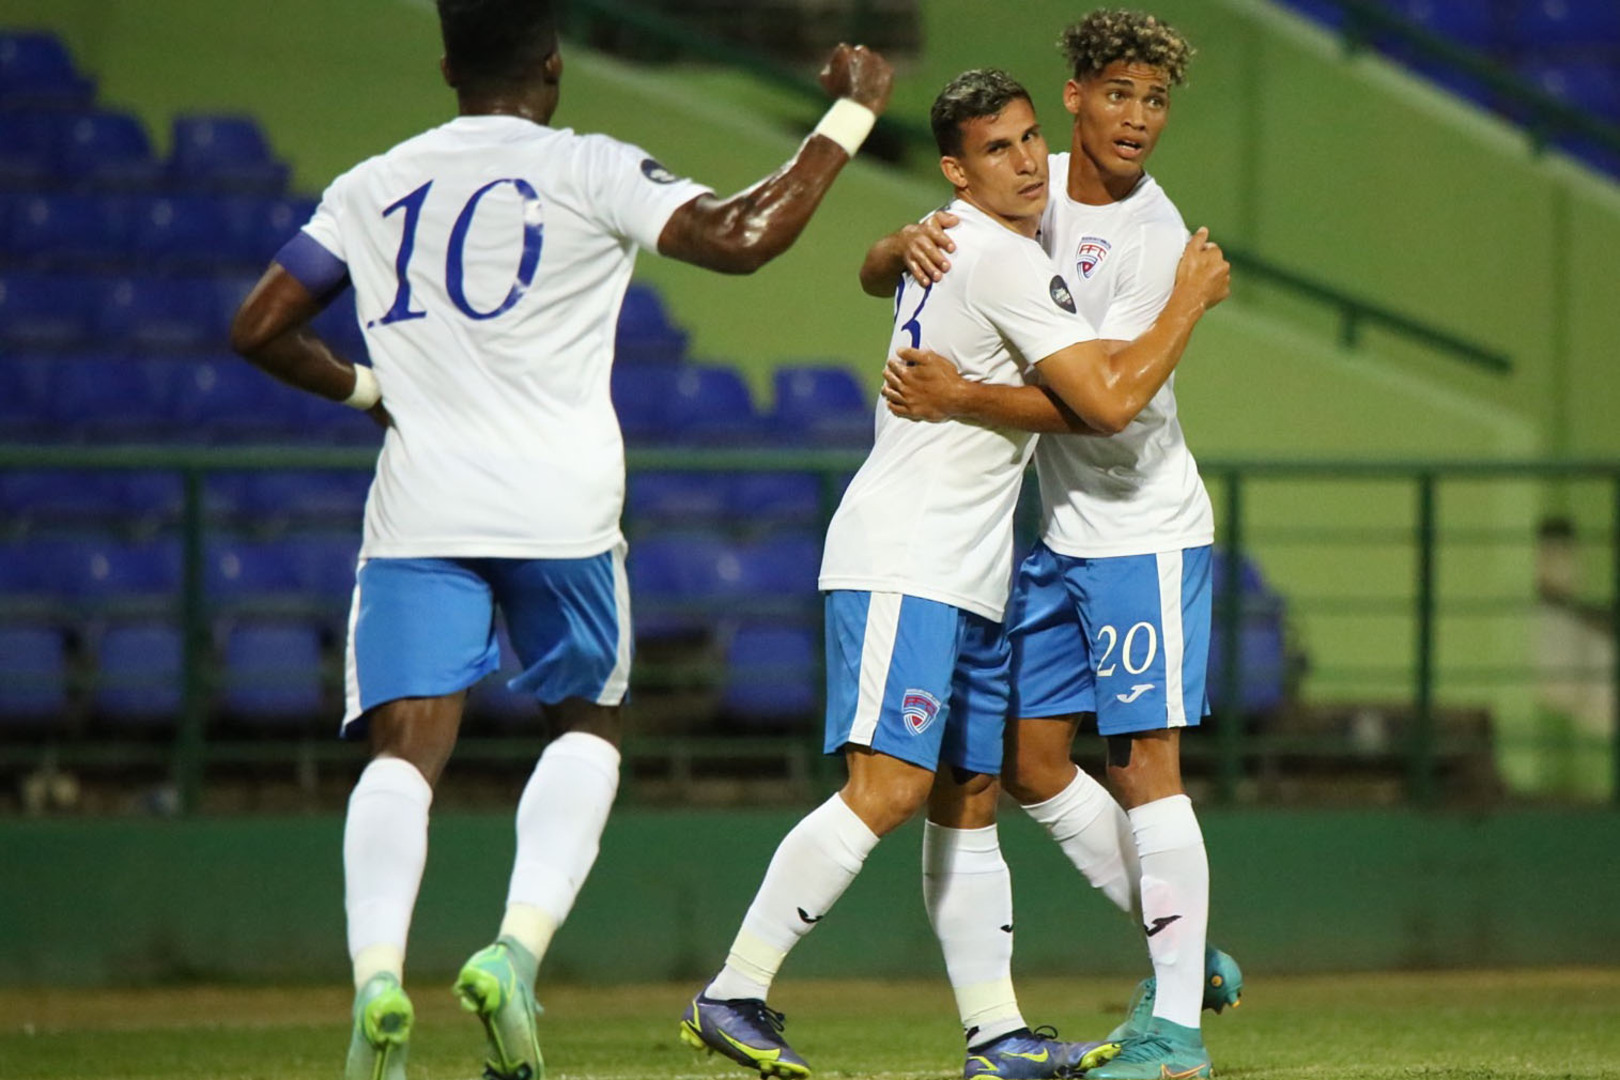 Highlights and goals of Barbados 0-1 Cuba in CONCACAF Nations League